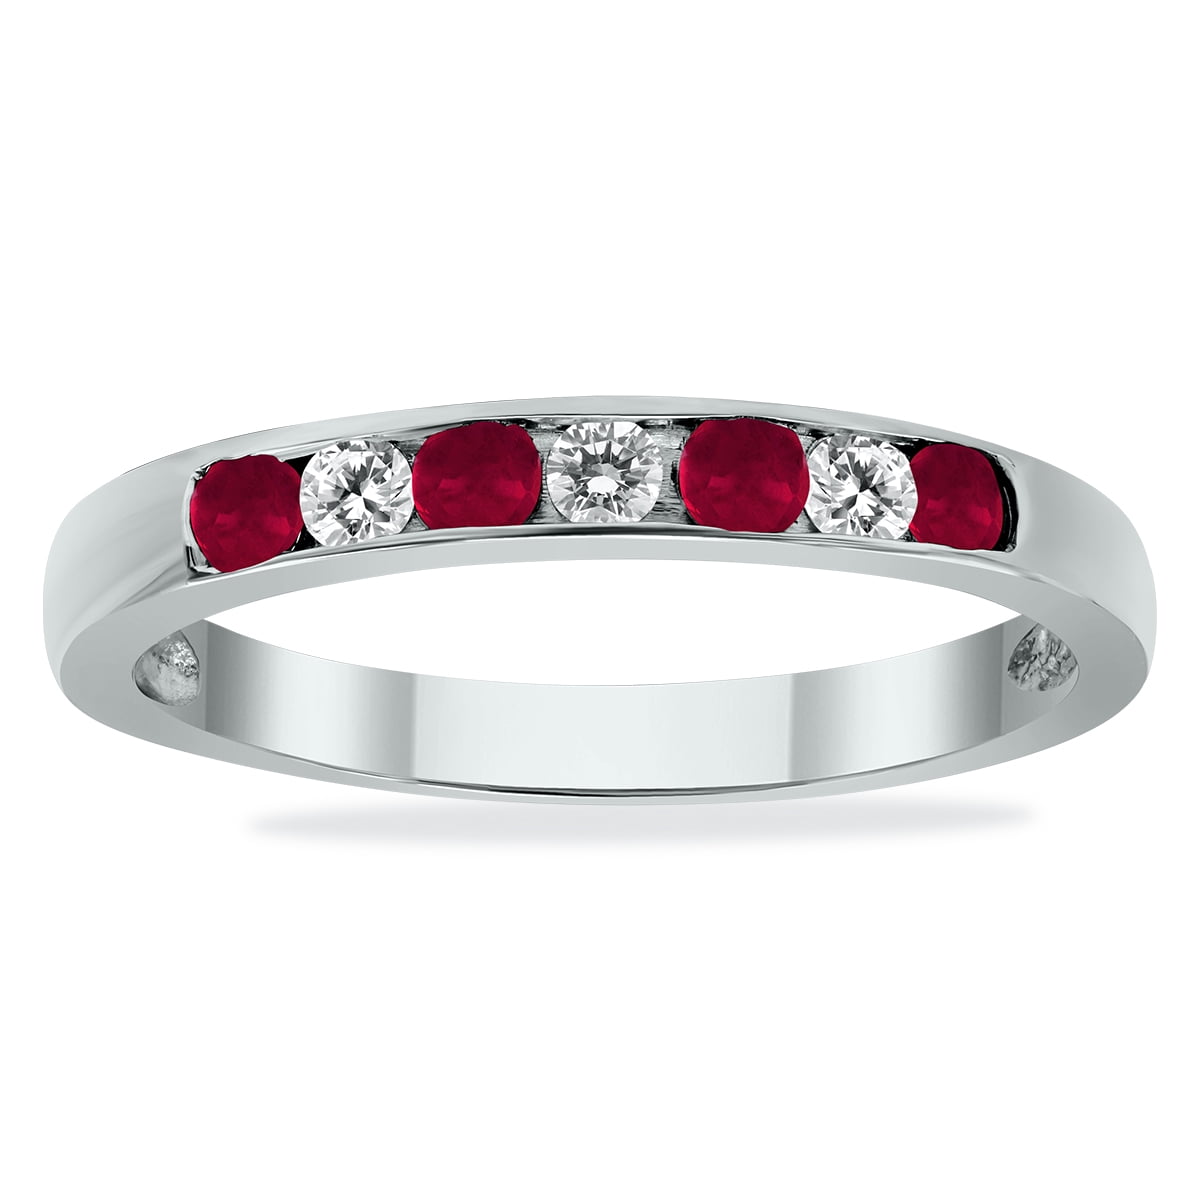 Szul Women's Ruby and Diamond Stackable Channel Set Ring in 14K White Gold, Size: 6, Red